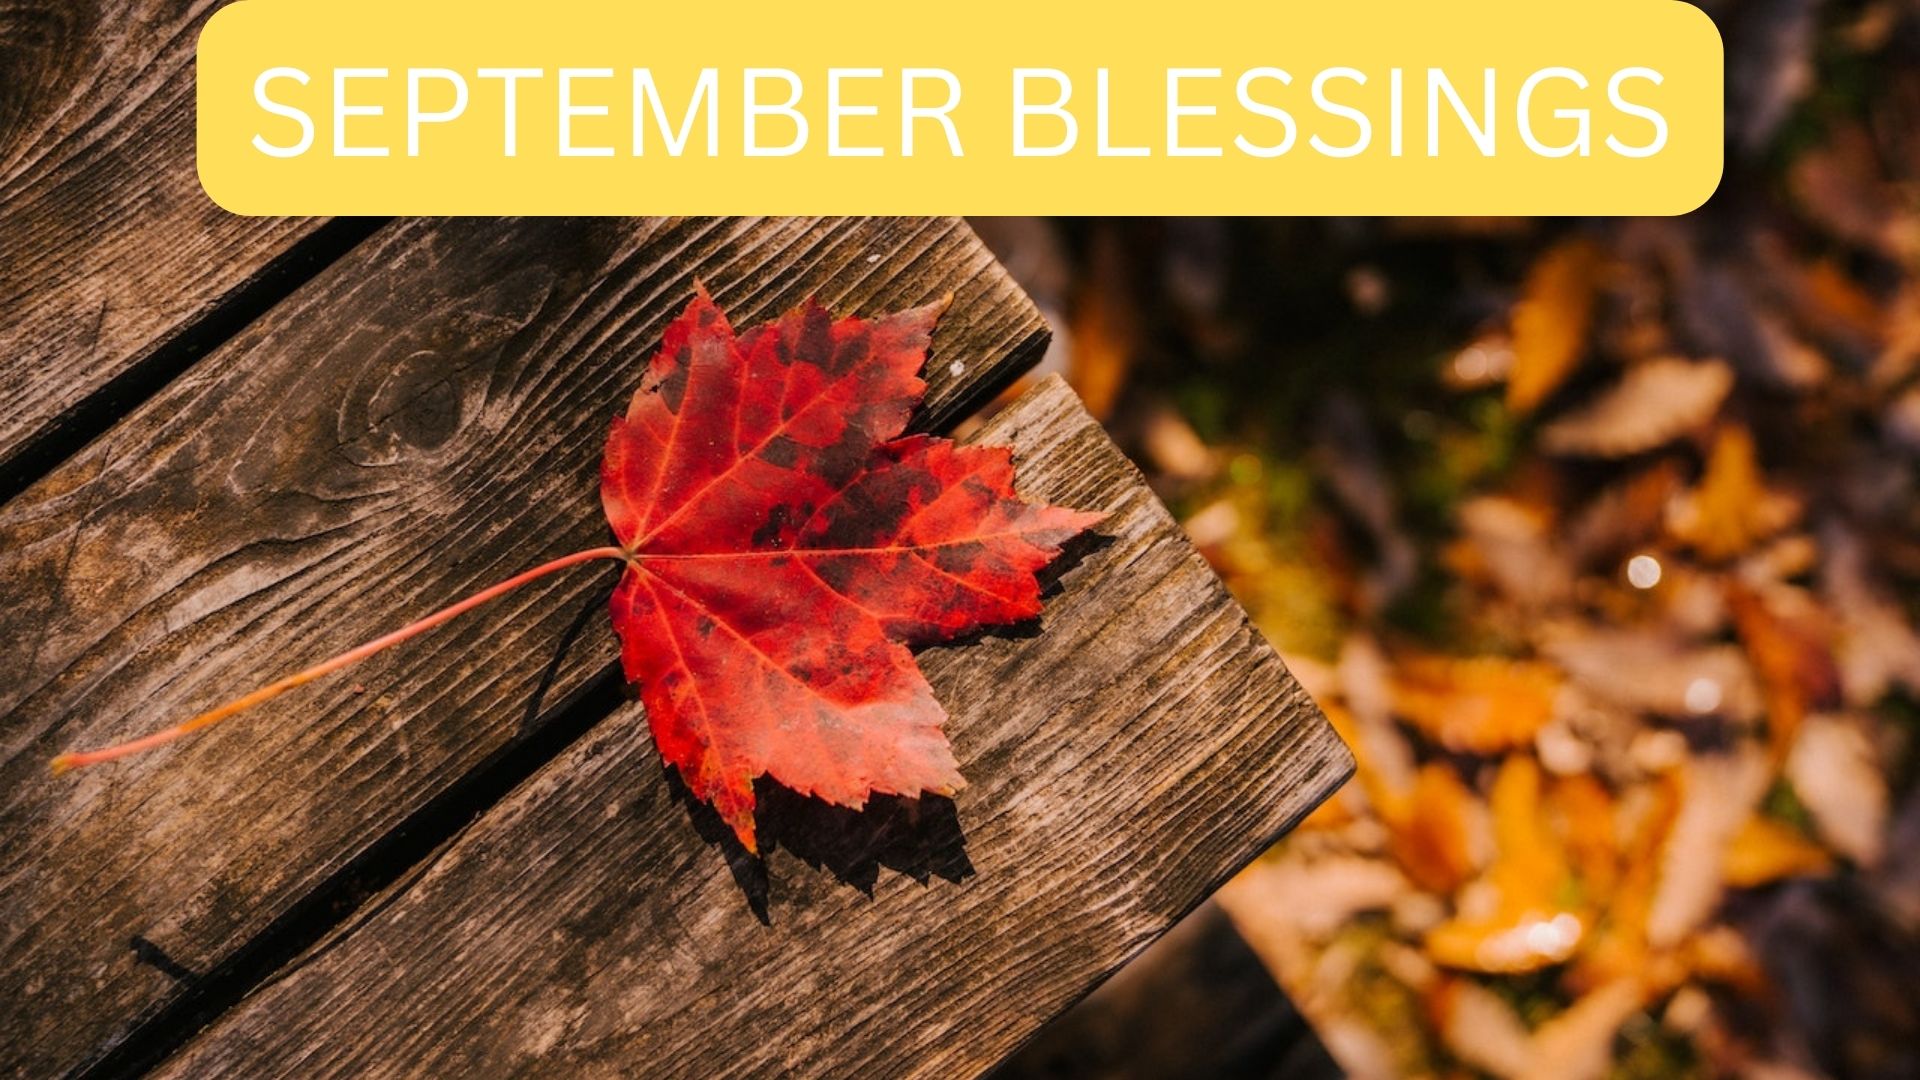 September Blessings - Over Yourself And Your Loved Ones